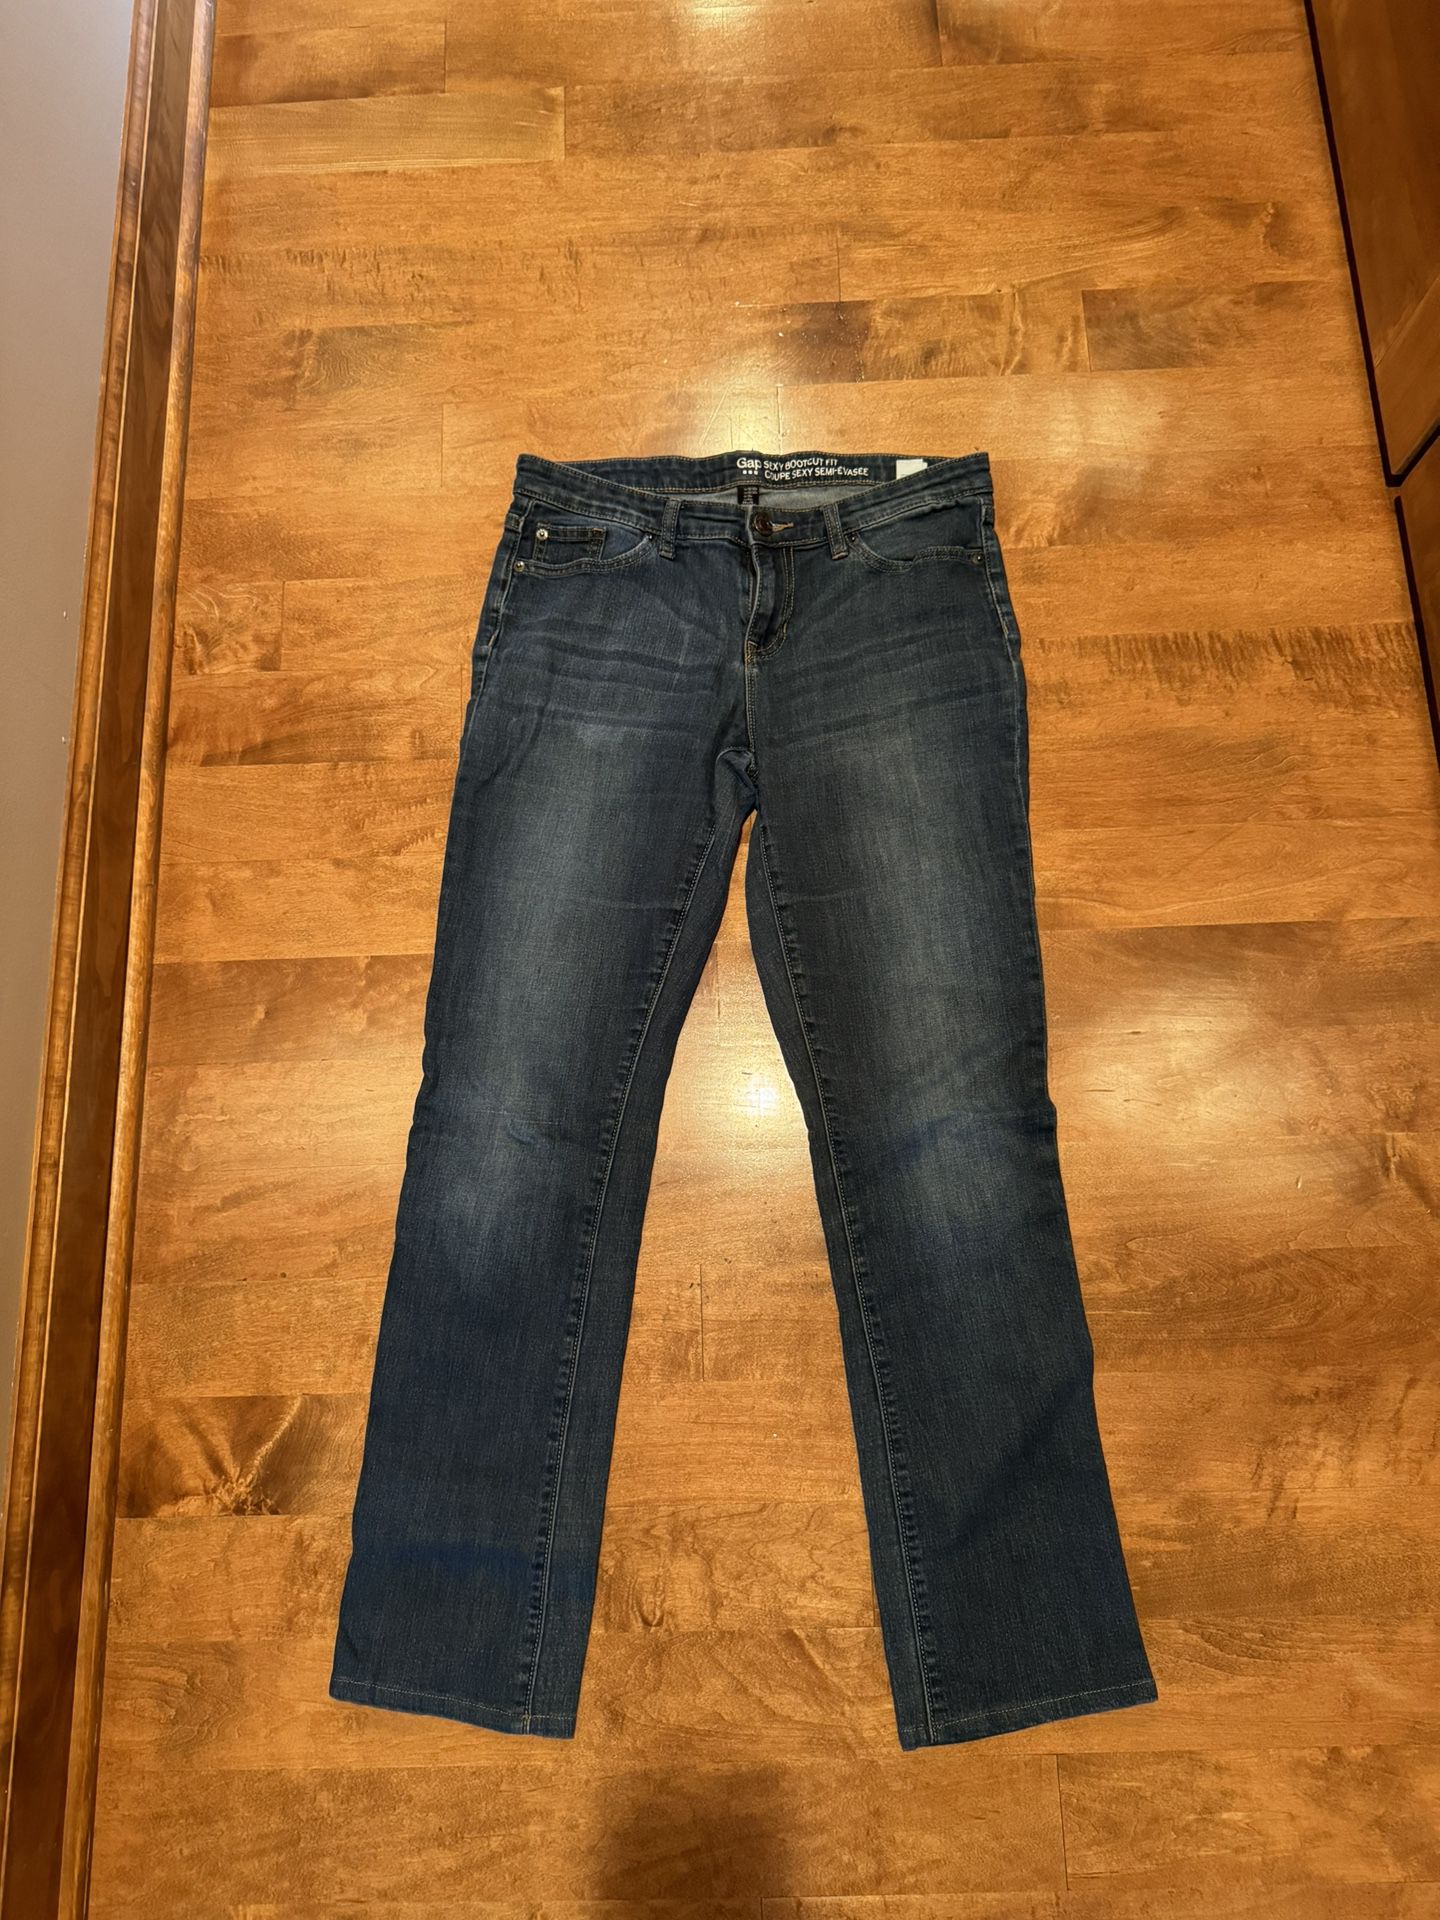 Woman’s Gap Sexy Bootcut Fit Jeans Shipping Avaialbe 